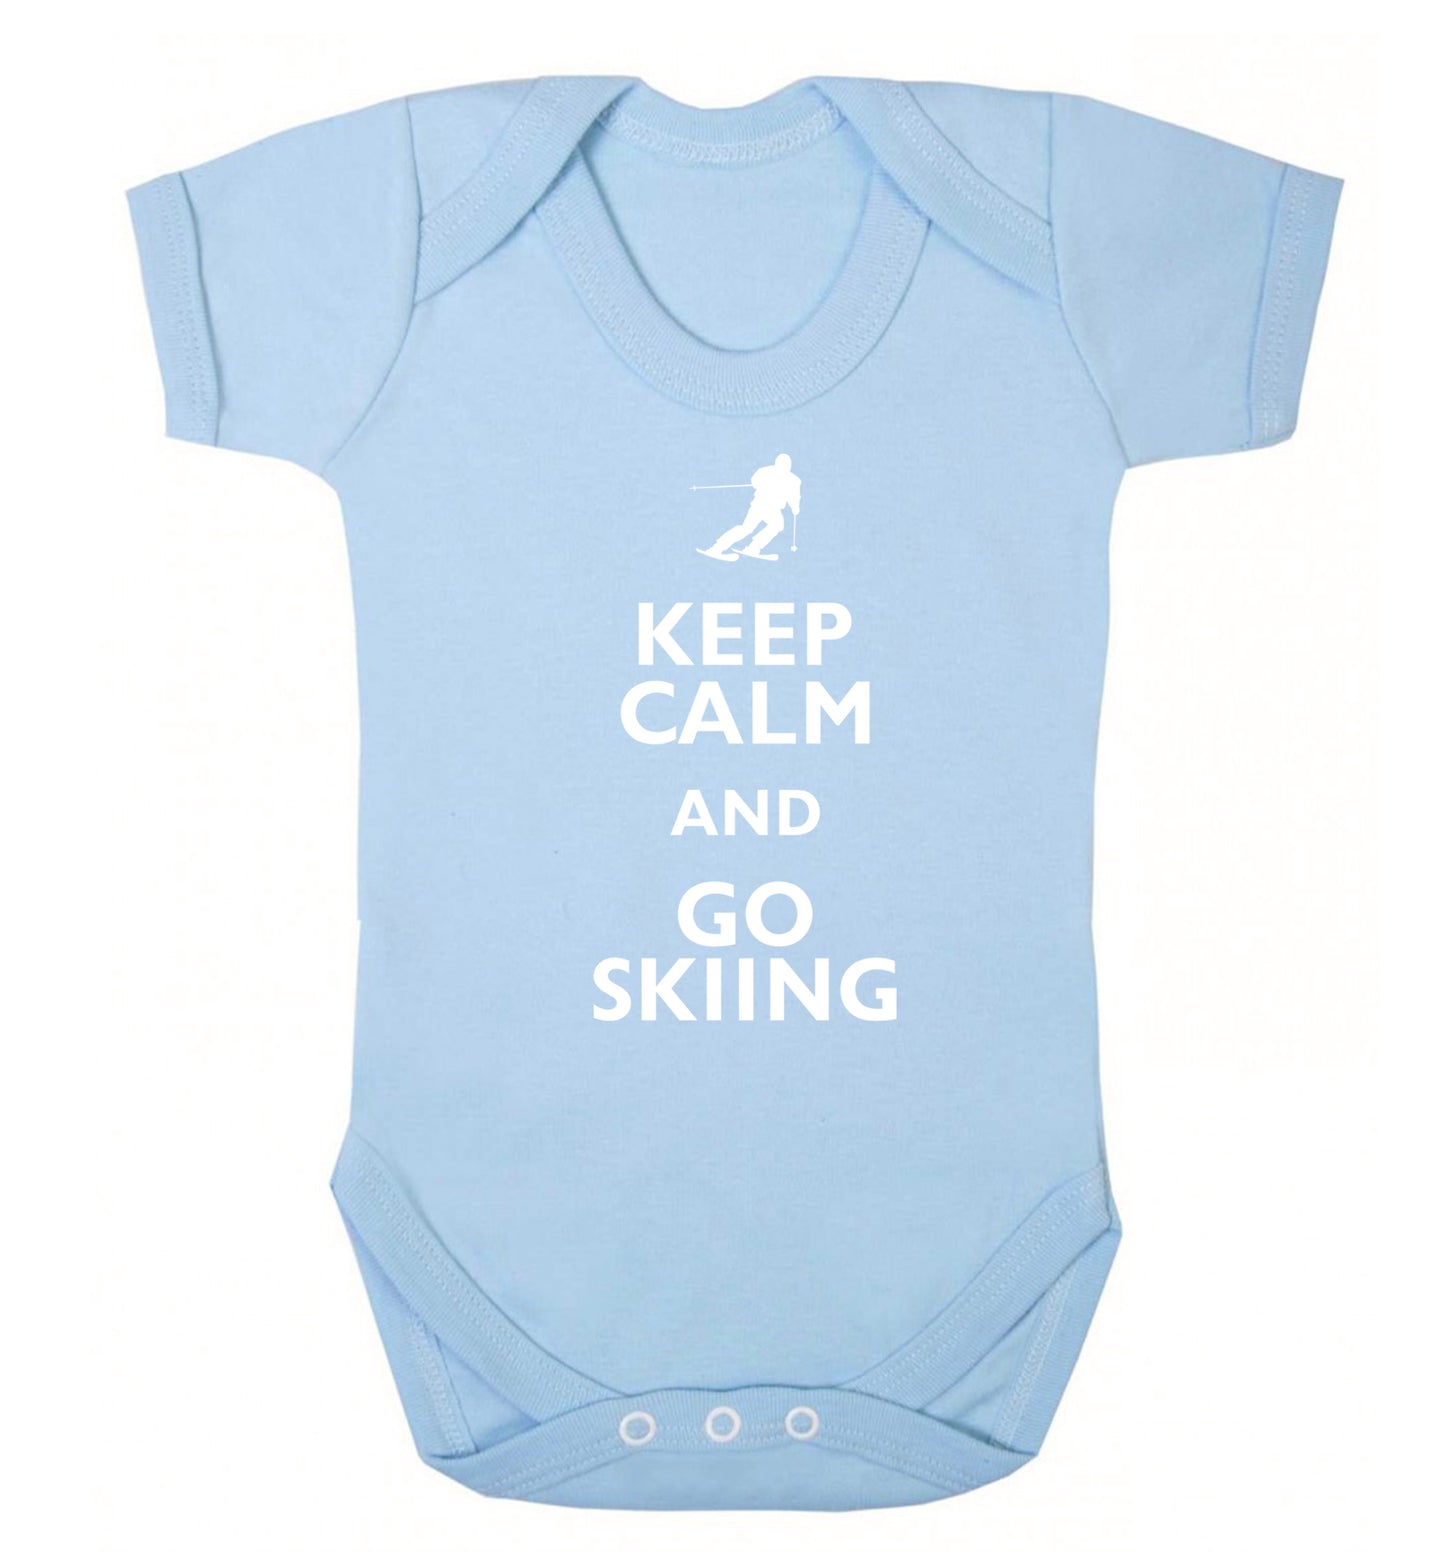 Keep calm and go skiing Baby Vest pale blue 18-24 months